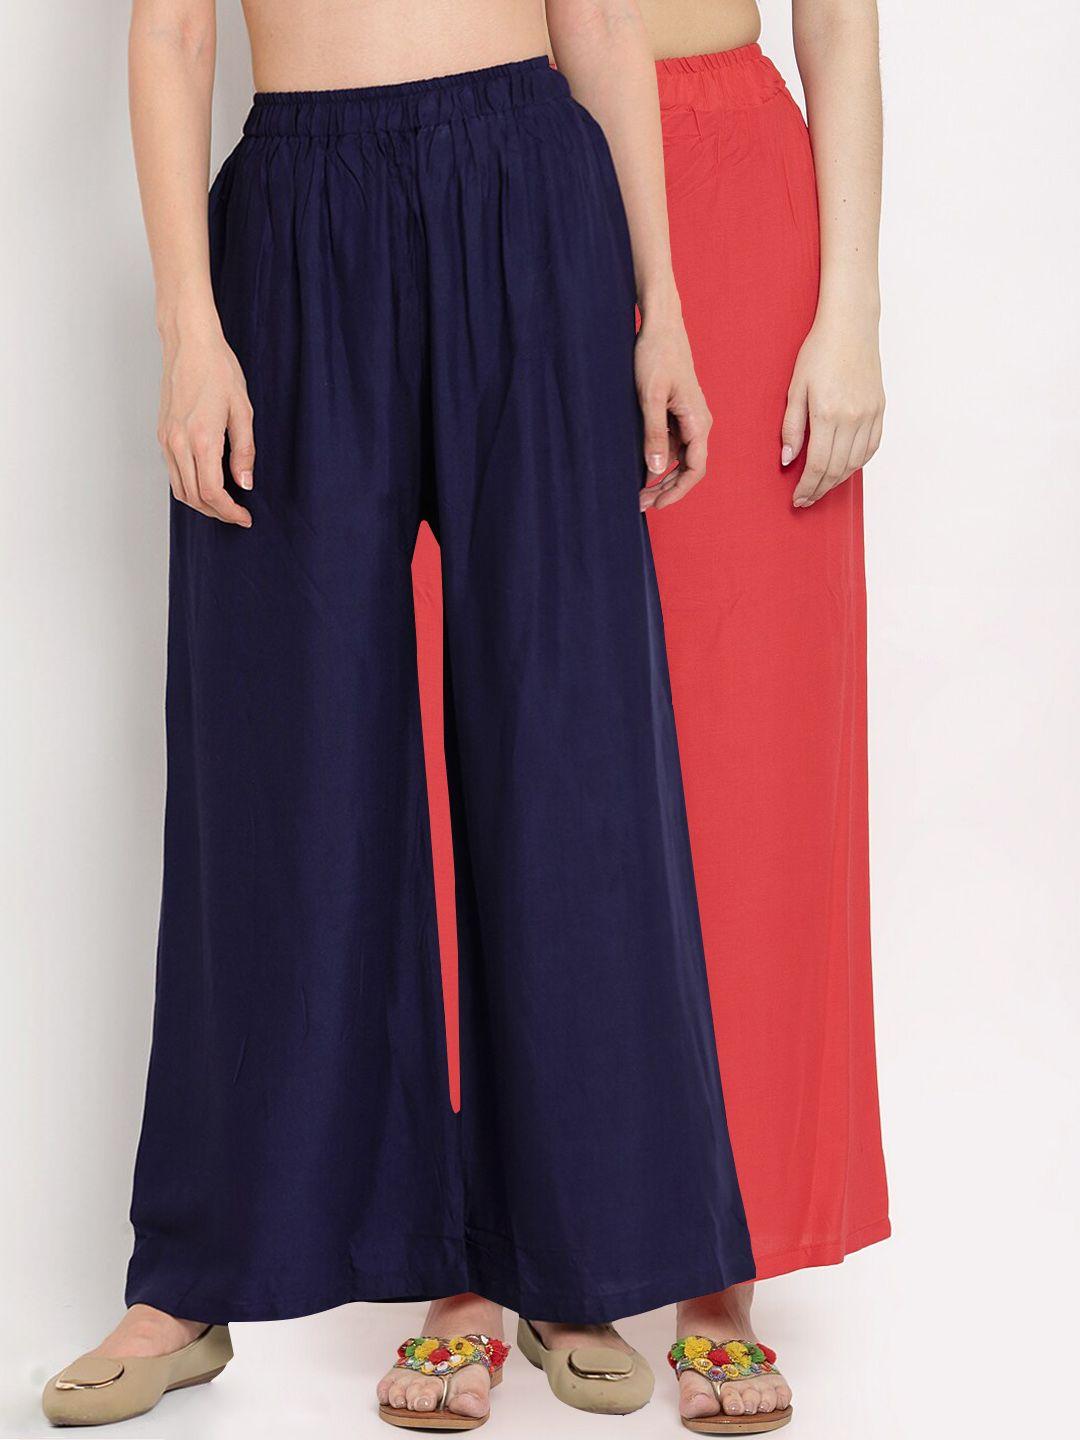 tag 7 women coral & navy blue solid wide leg palazzos